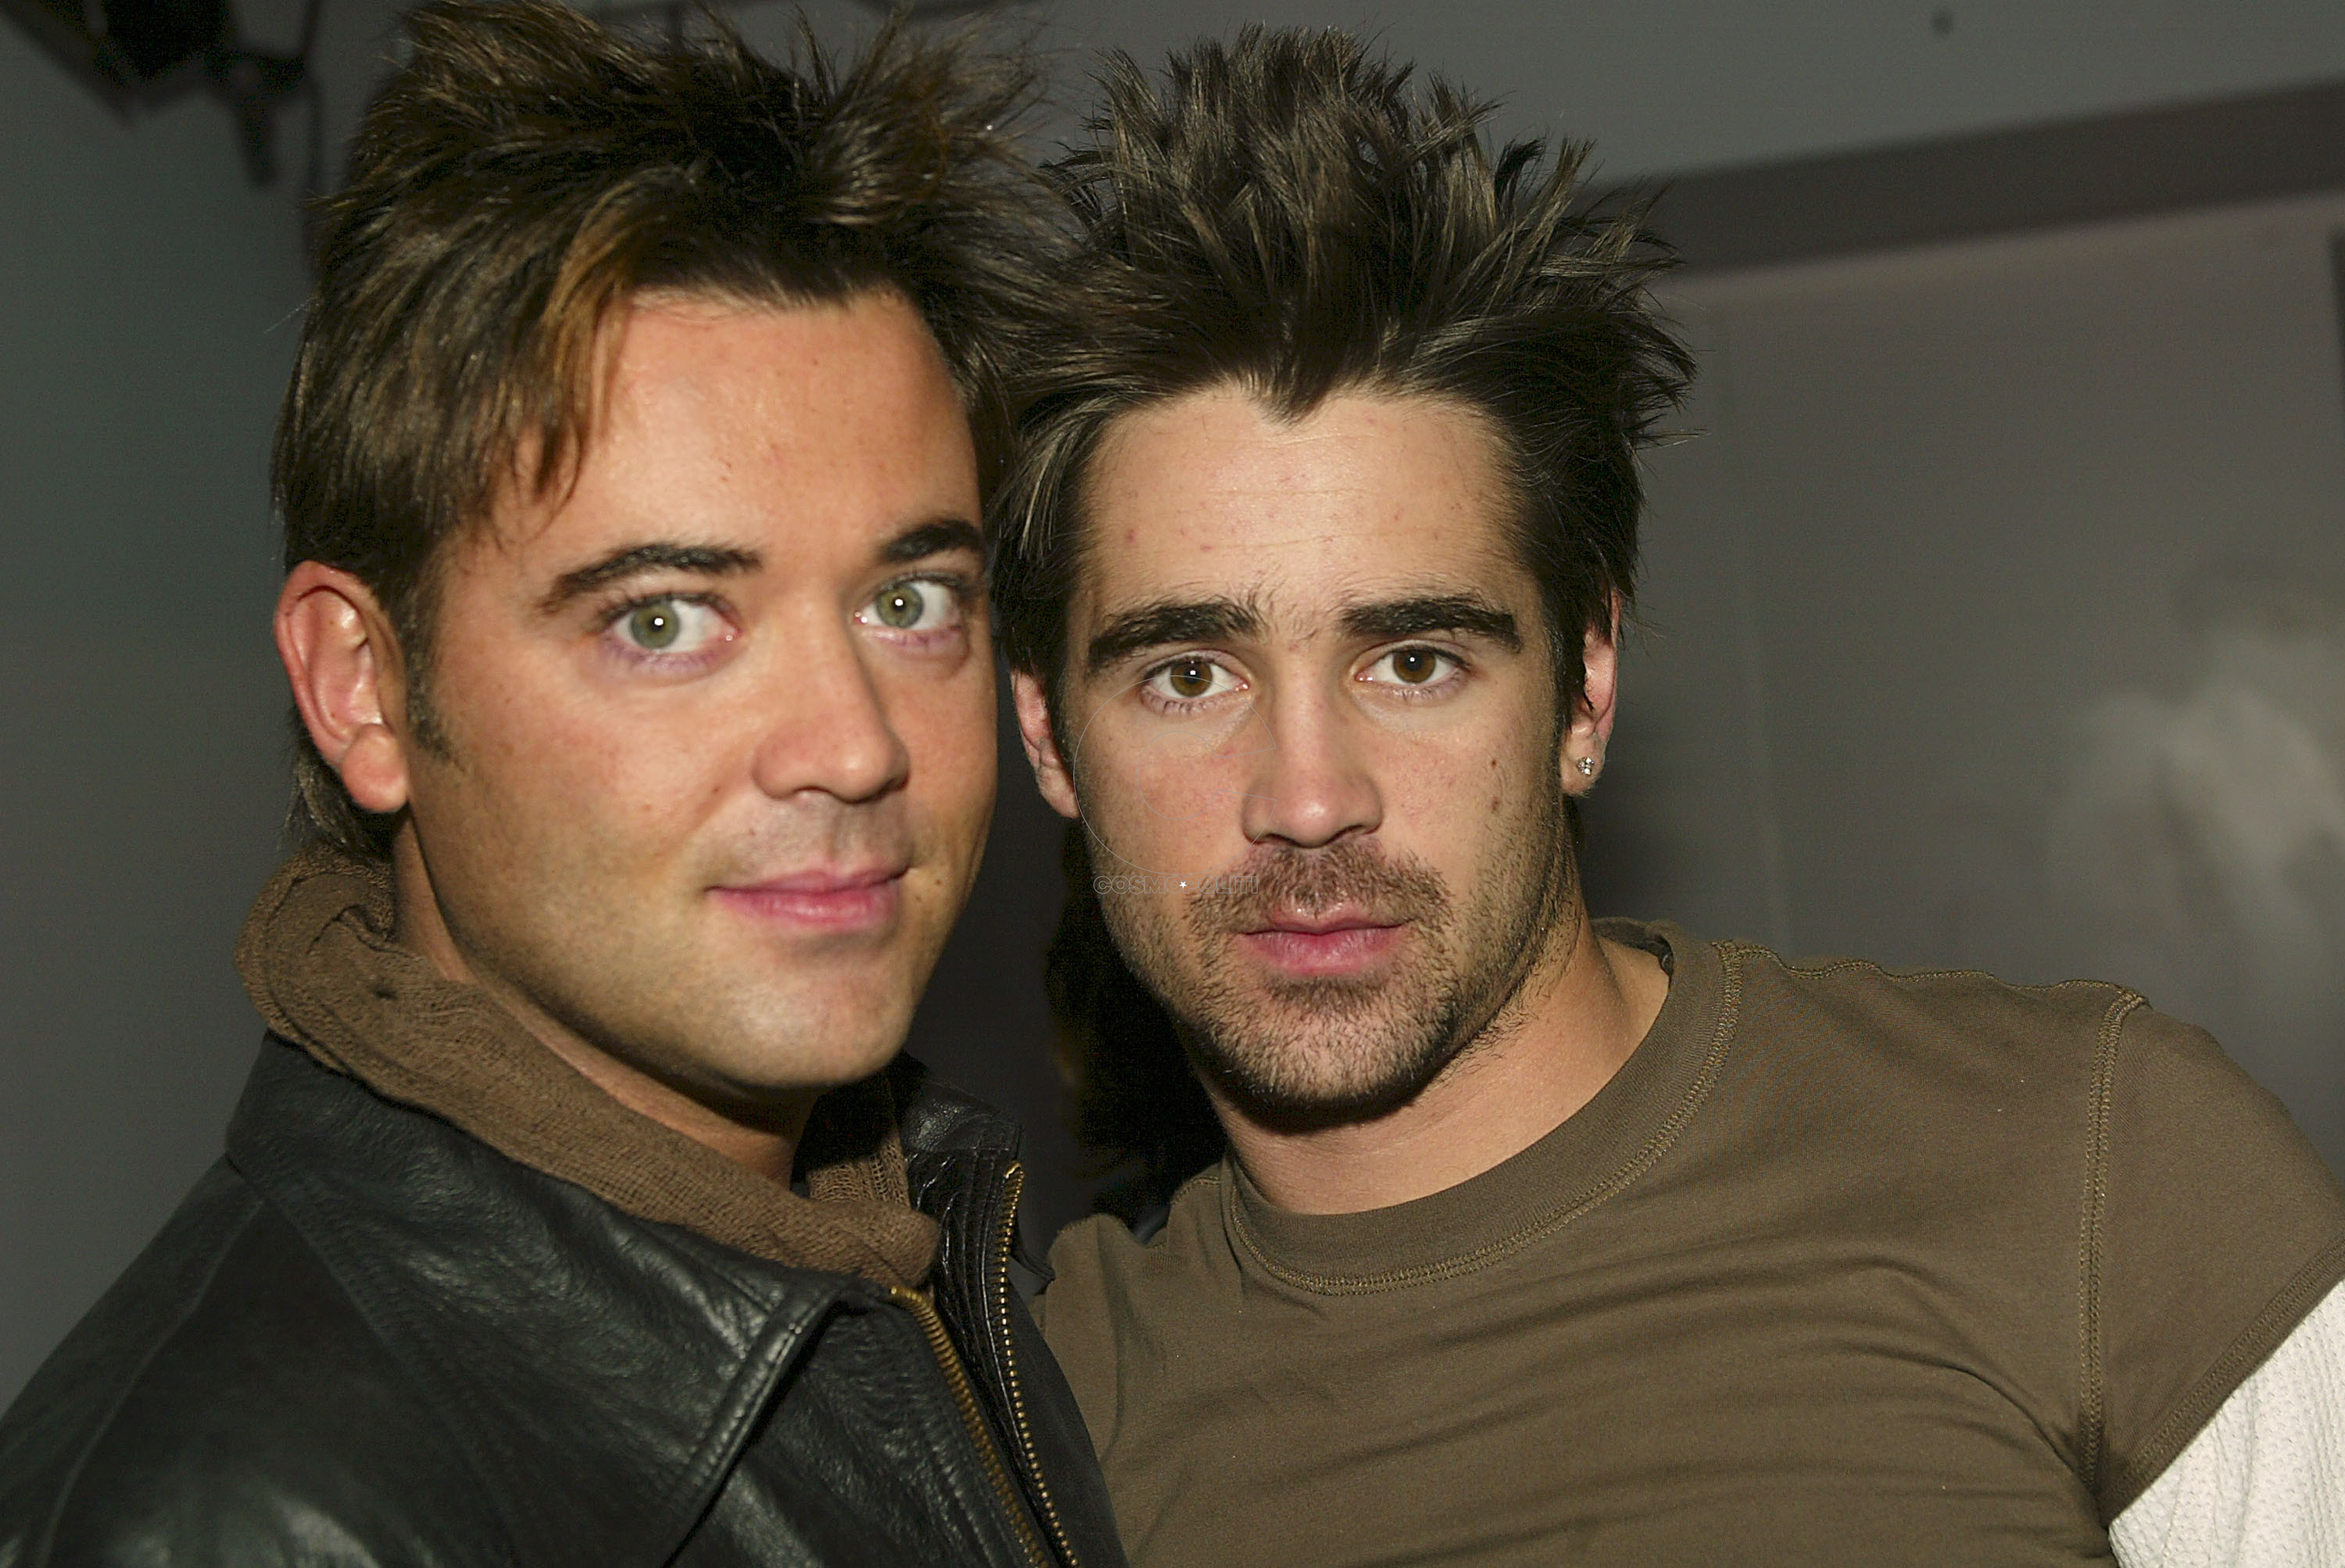 NEW YORK - APRIL 1:  (U.S. TABS OUT)  Actor Colin Farrell (R) and his brother Eamonn appear on MTV's Total Request Live April 1, 2003 at the MTV Times Square Studios in New York City.  (Photo by Scott Gries/Getty Images)